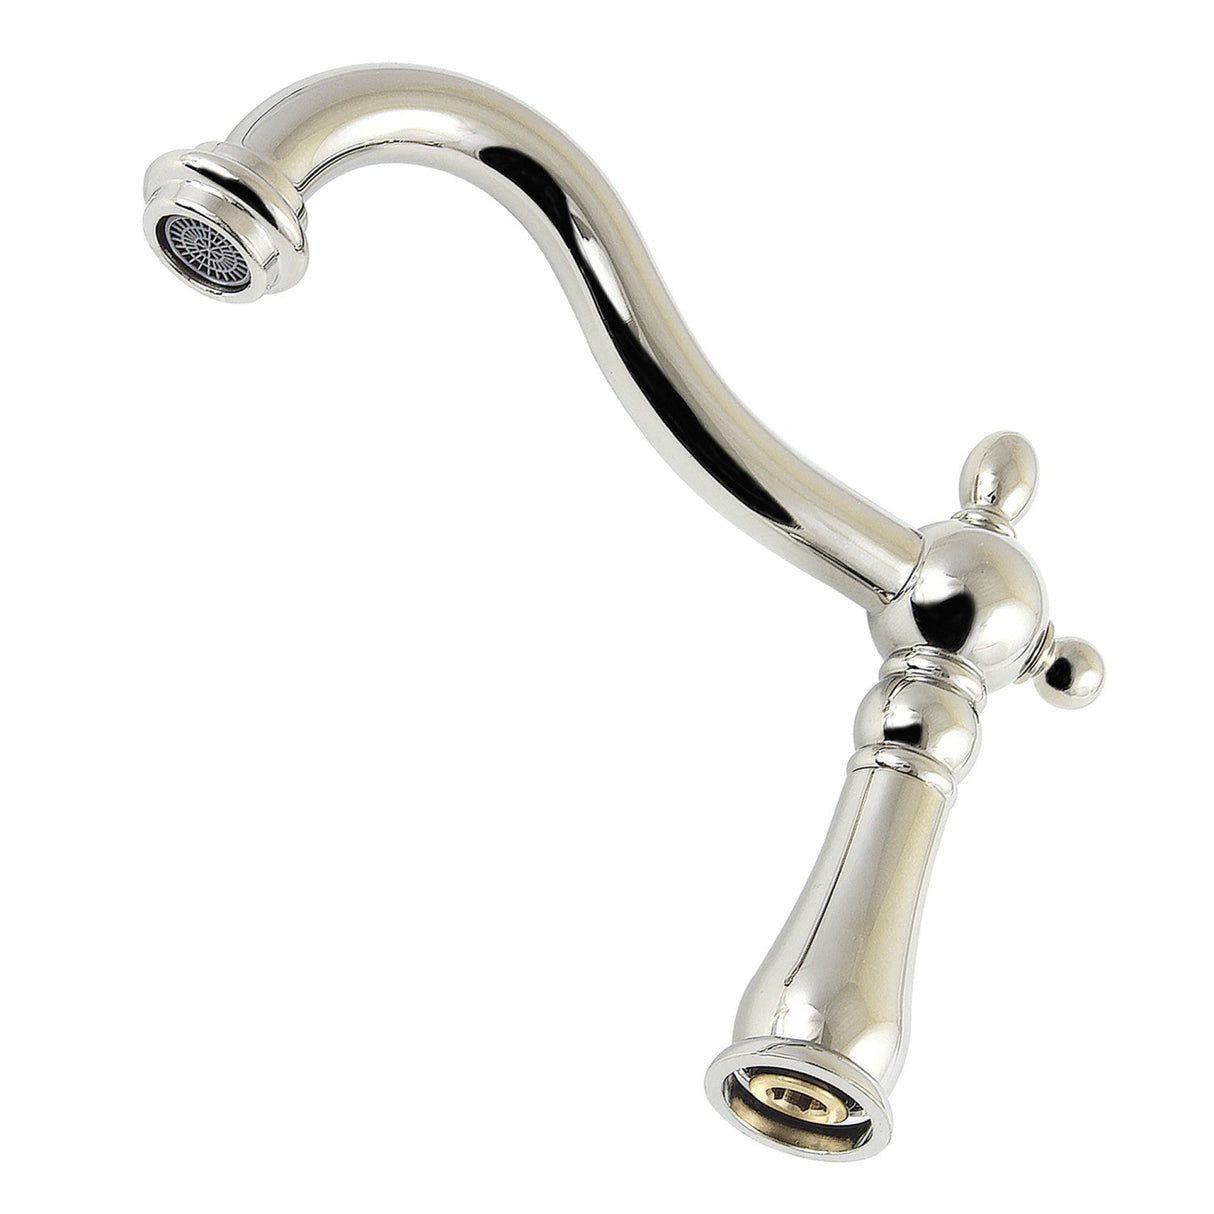 Heritage KSP1266 1.8 GPM 6-1/2 Inch Brass Faucet Spout, Polished Nickel